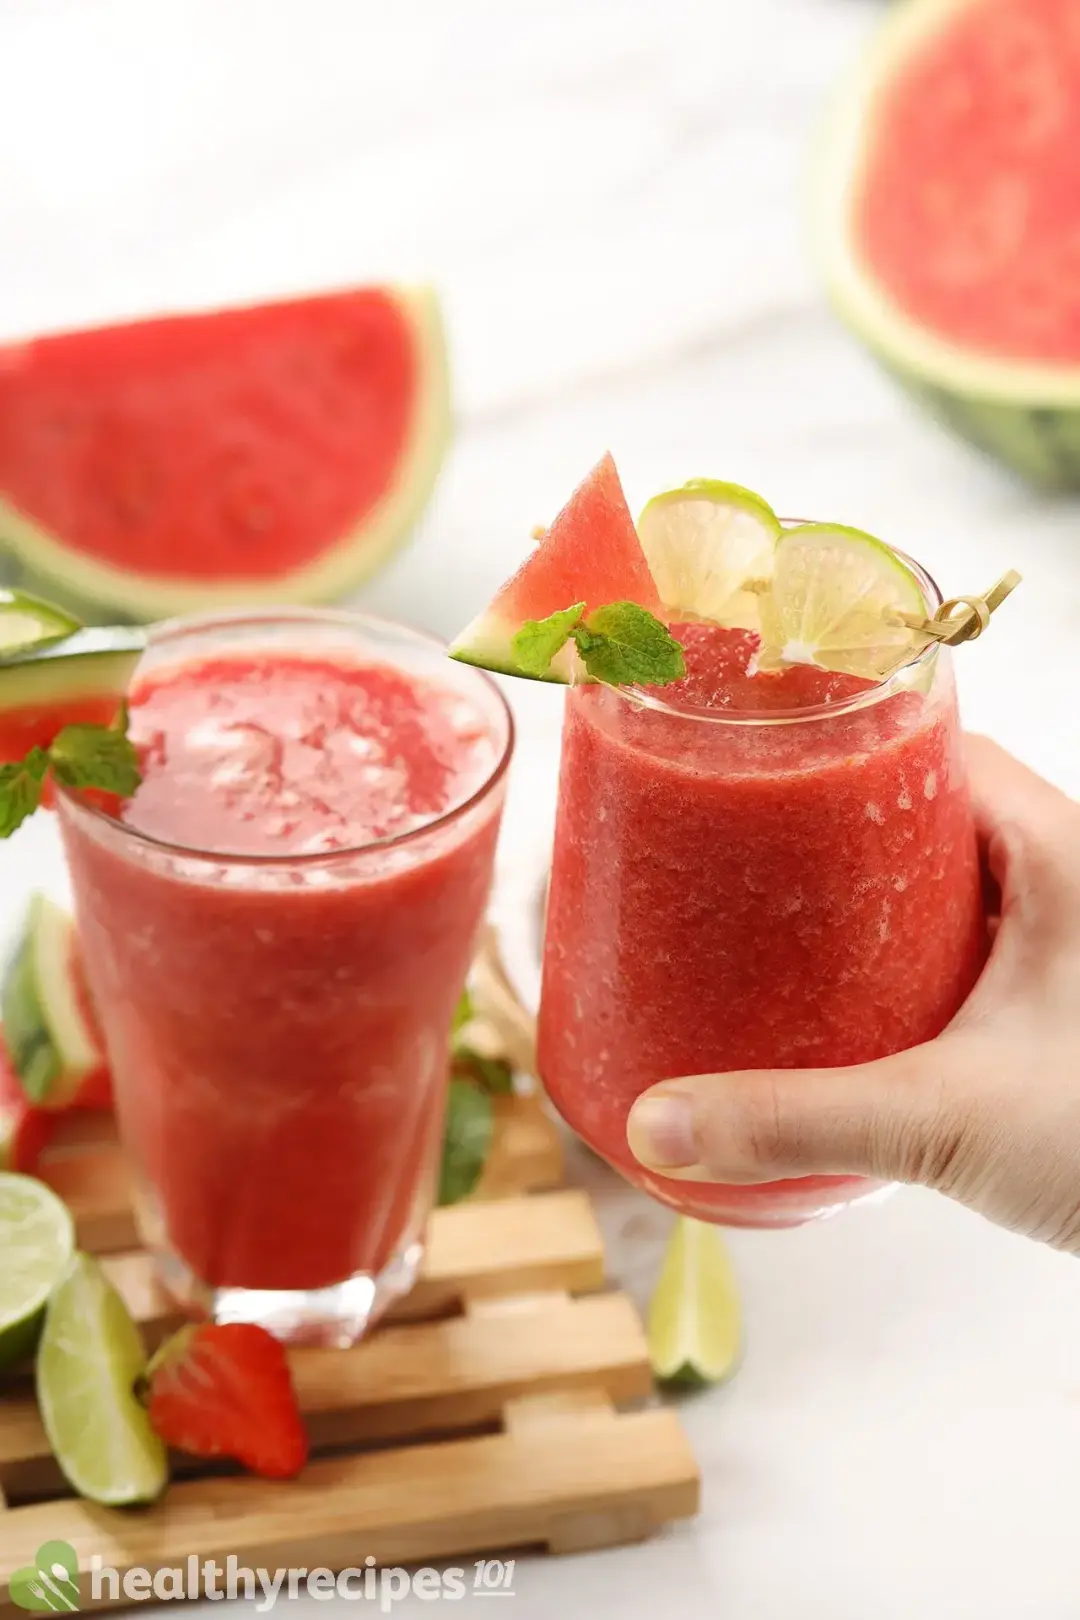 Two glasses of watermelon mojito smoothies, with one placed on a wooden tray surrounded with some fruit decorations and another held in the air by one hand